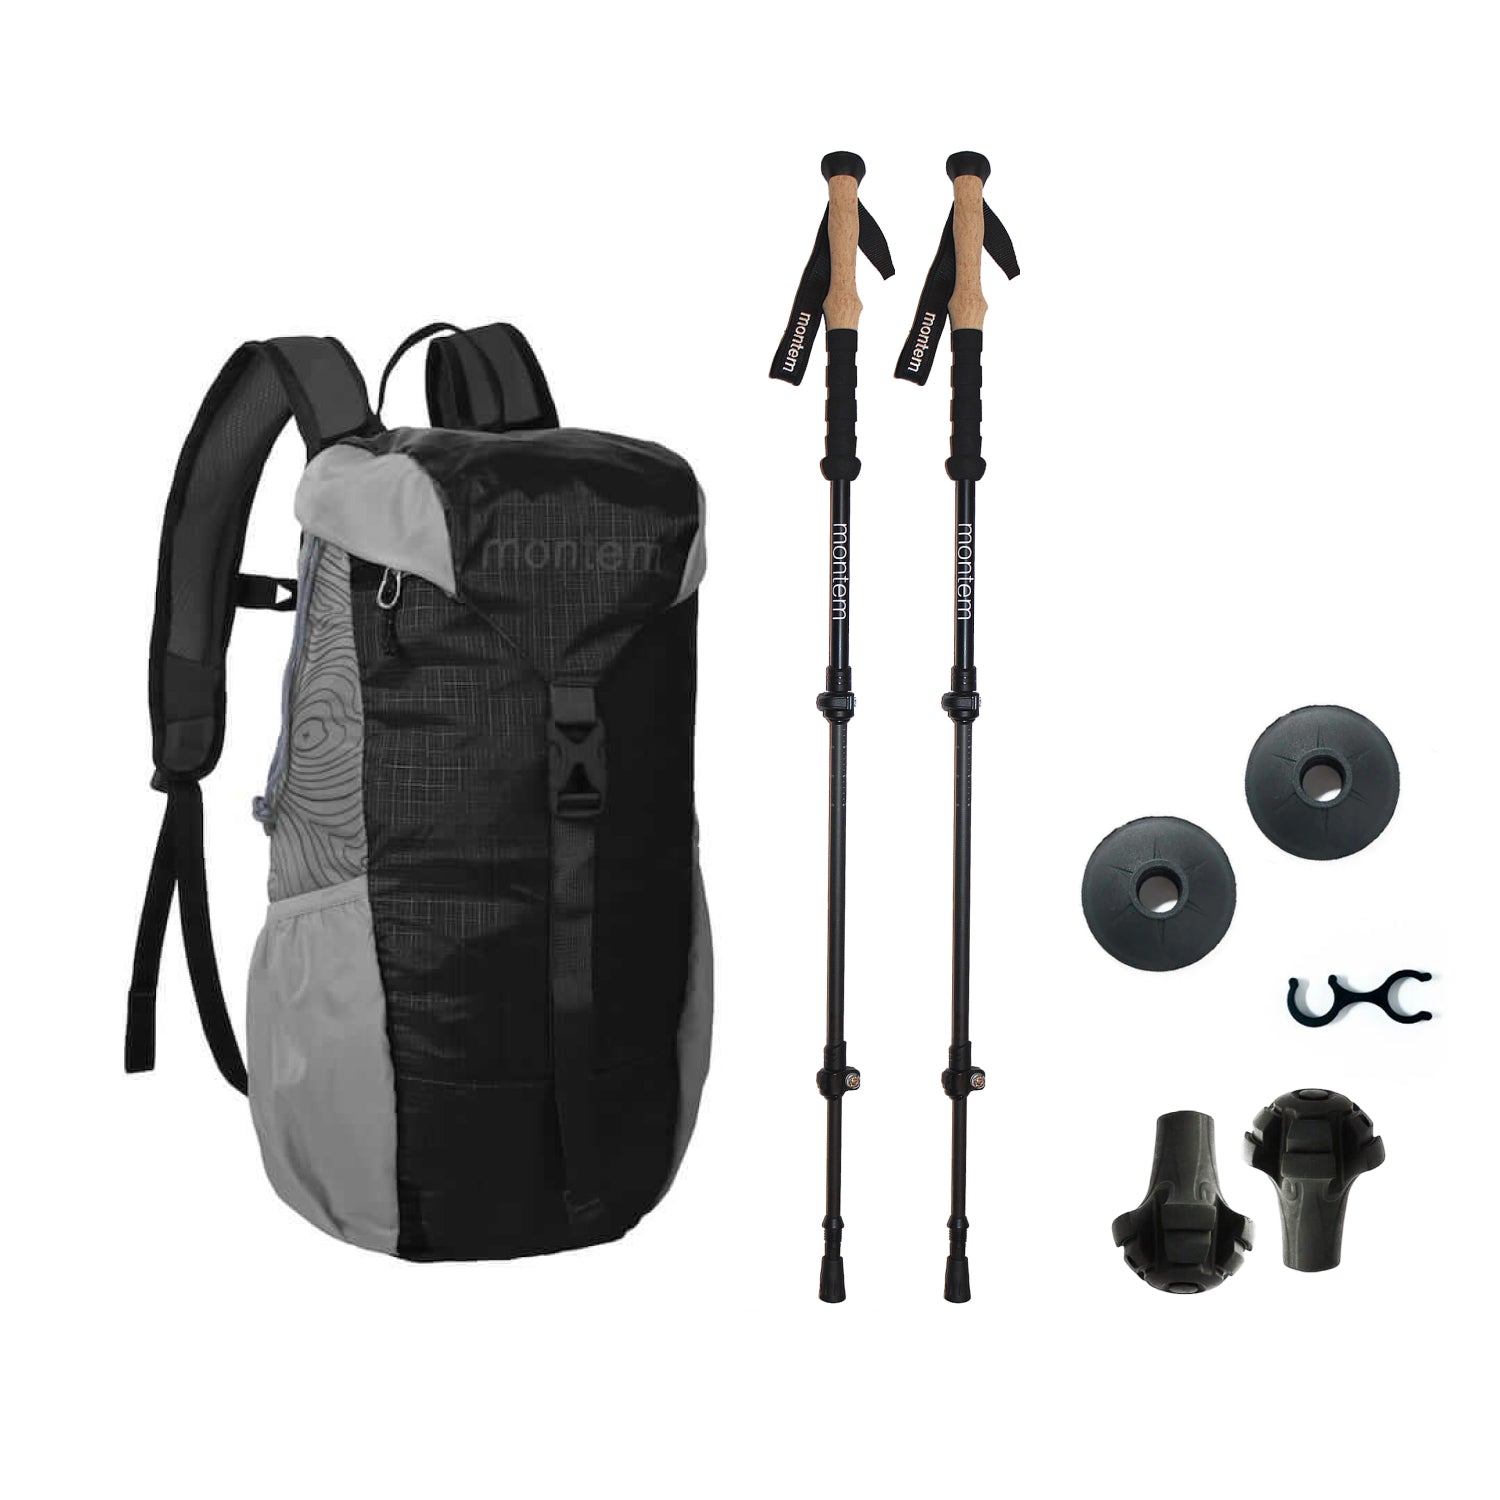 Hiking Poles - The #1 Rated Trekking Poles in the U.S. – Montem Outdoor Gear